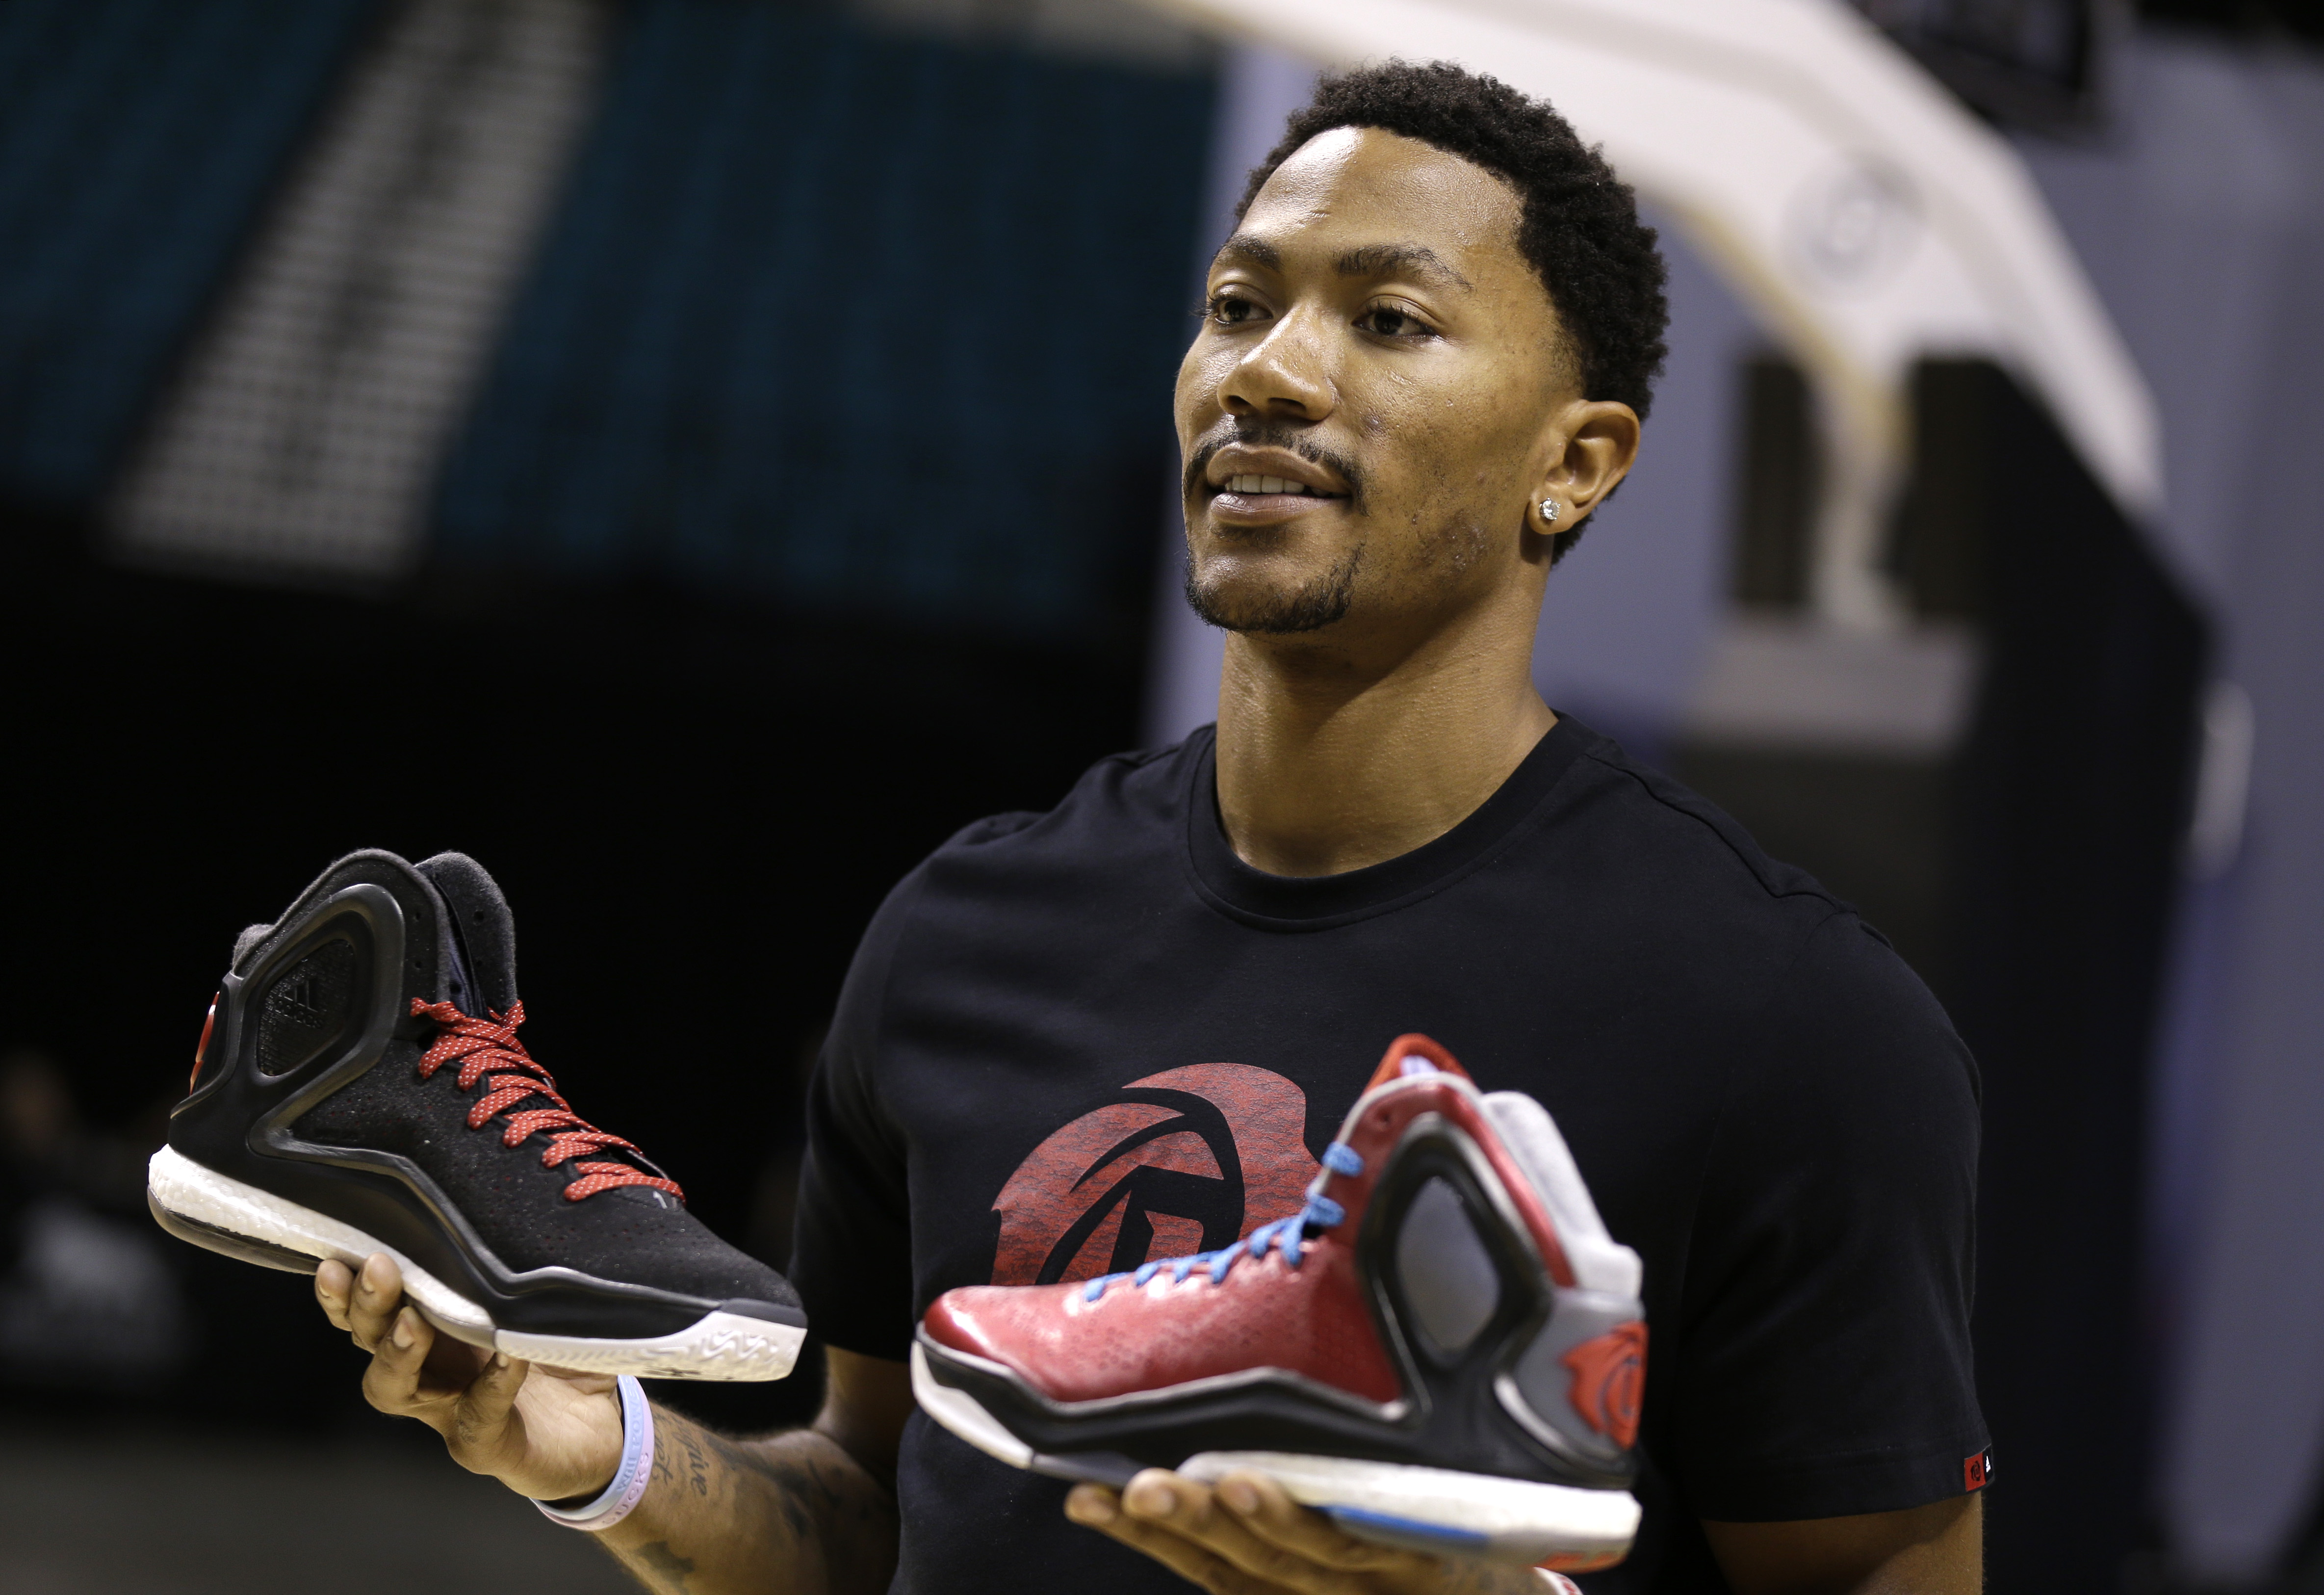 Derrick Rose of the Chicago Bulls shows off the new adidas D Rose